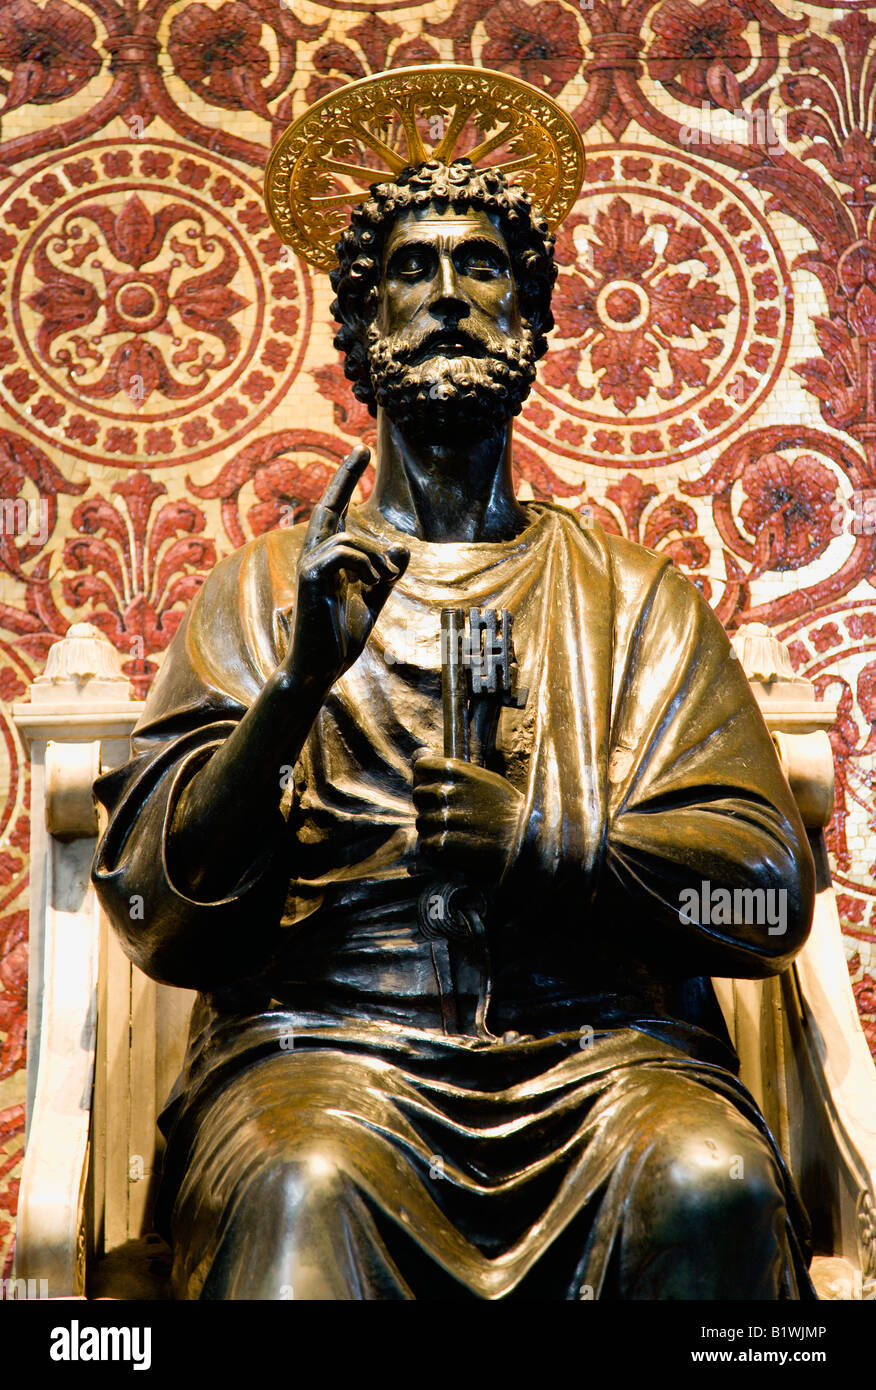 ITALY Lazio Rome Vatican City St Peter's Basilica The 13th Century bronze statue of St Peter holding the Key by Arnolfo di Cambi Stock Photo